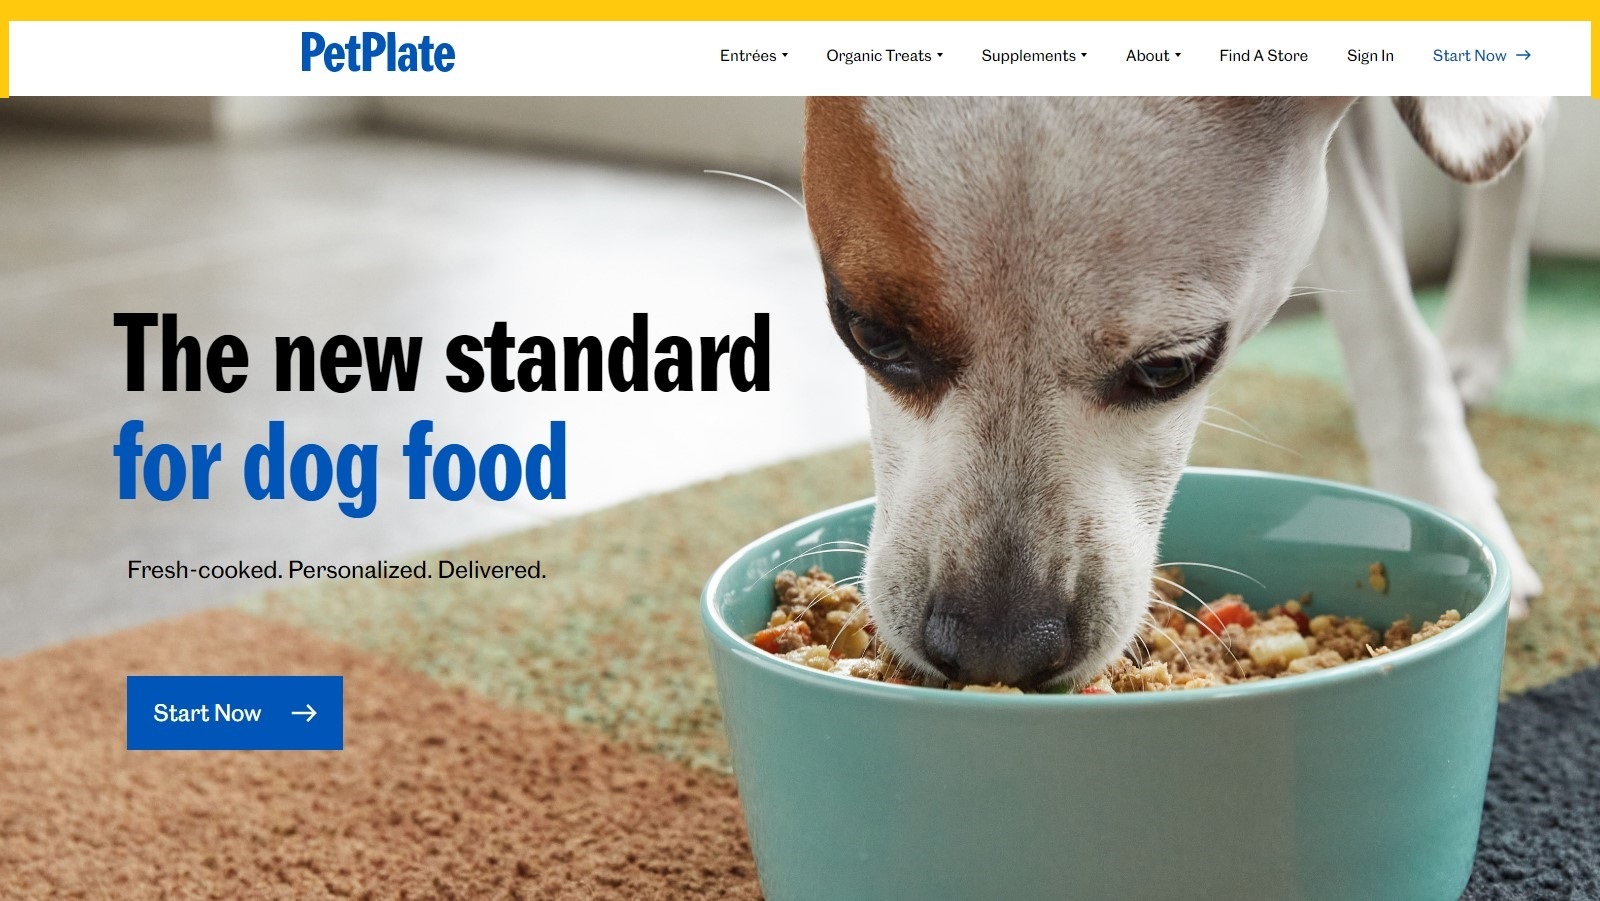 Pet Plate Dog Food Review: Why Does Your Furry Friend Like This Fresh Food?